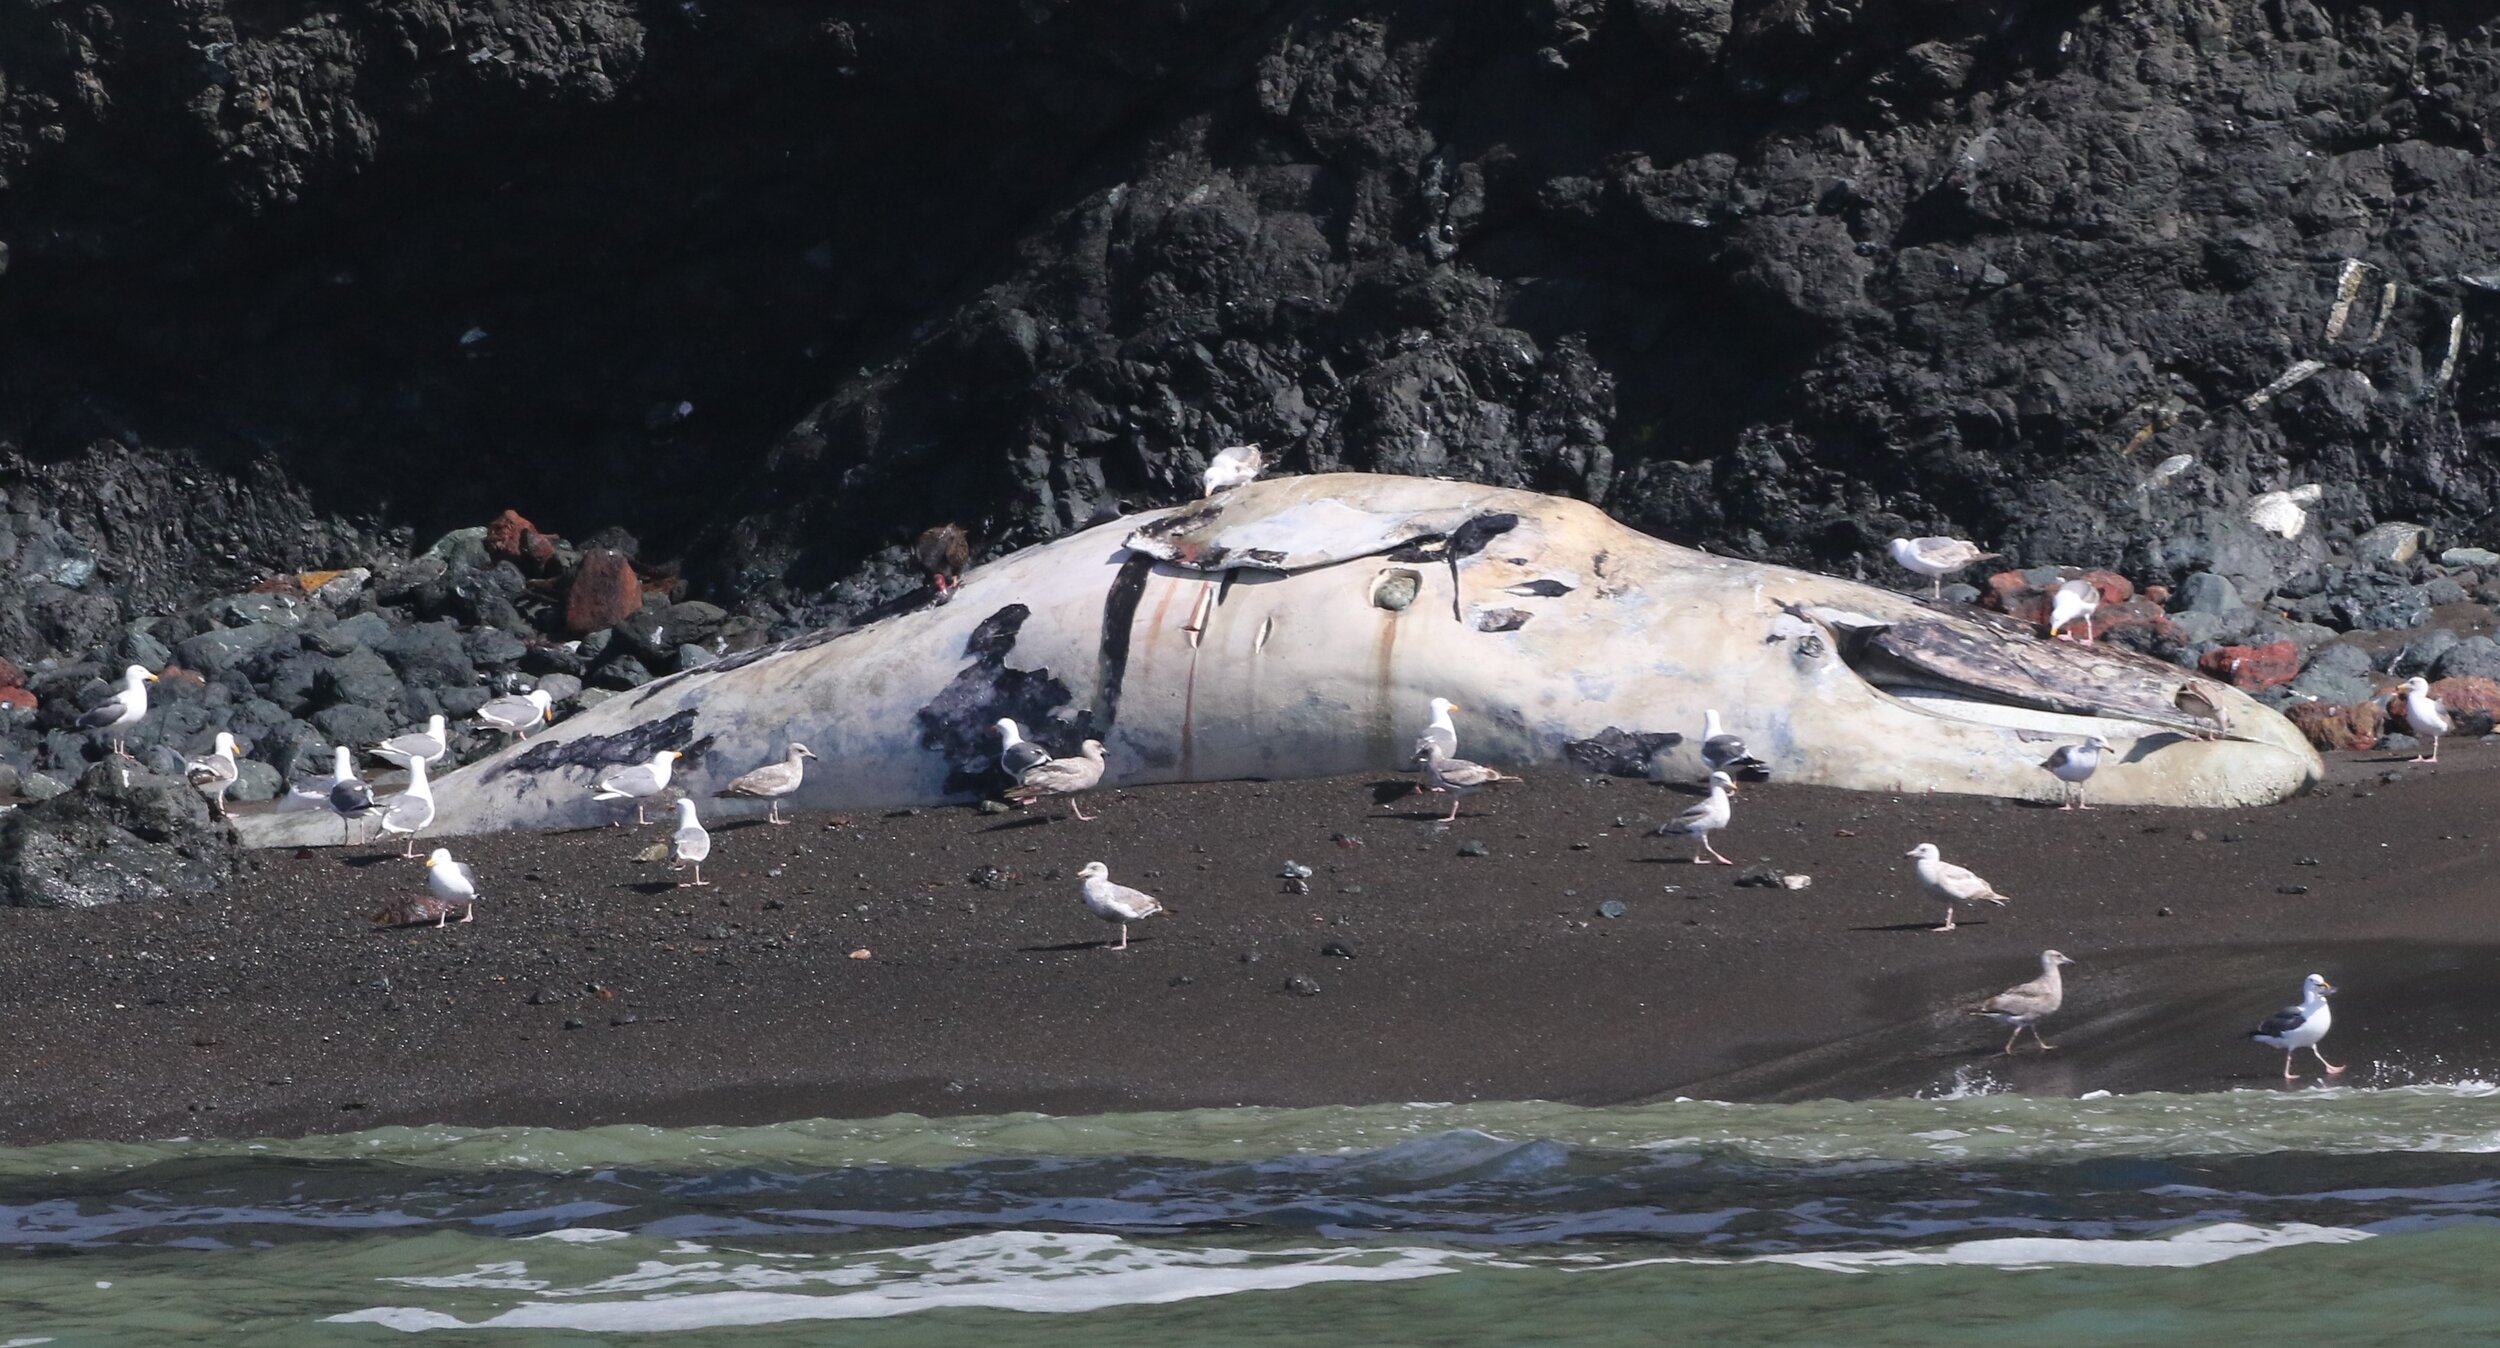  Above: An emaciated gray whale that stranded in Tiburon on April 27, 2021. Three rectangular samples of the skin and blubber were collected during necropsy.  Below: A gray whale stranded near Kirby Cove in the Marin Headlands on May 3, 2021.  Note t